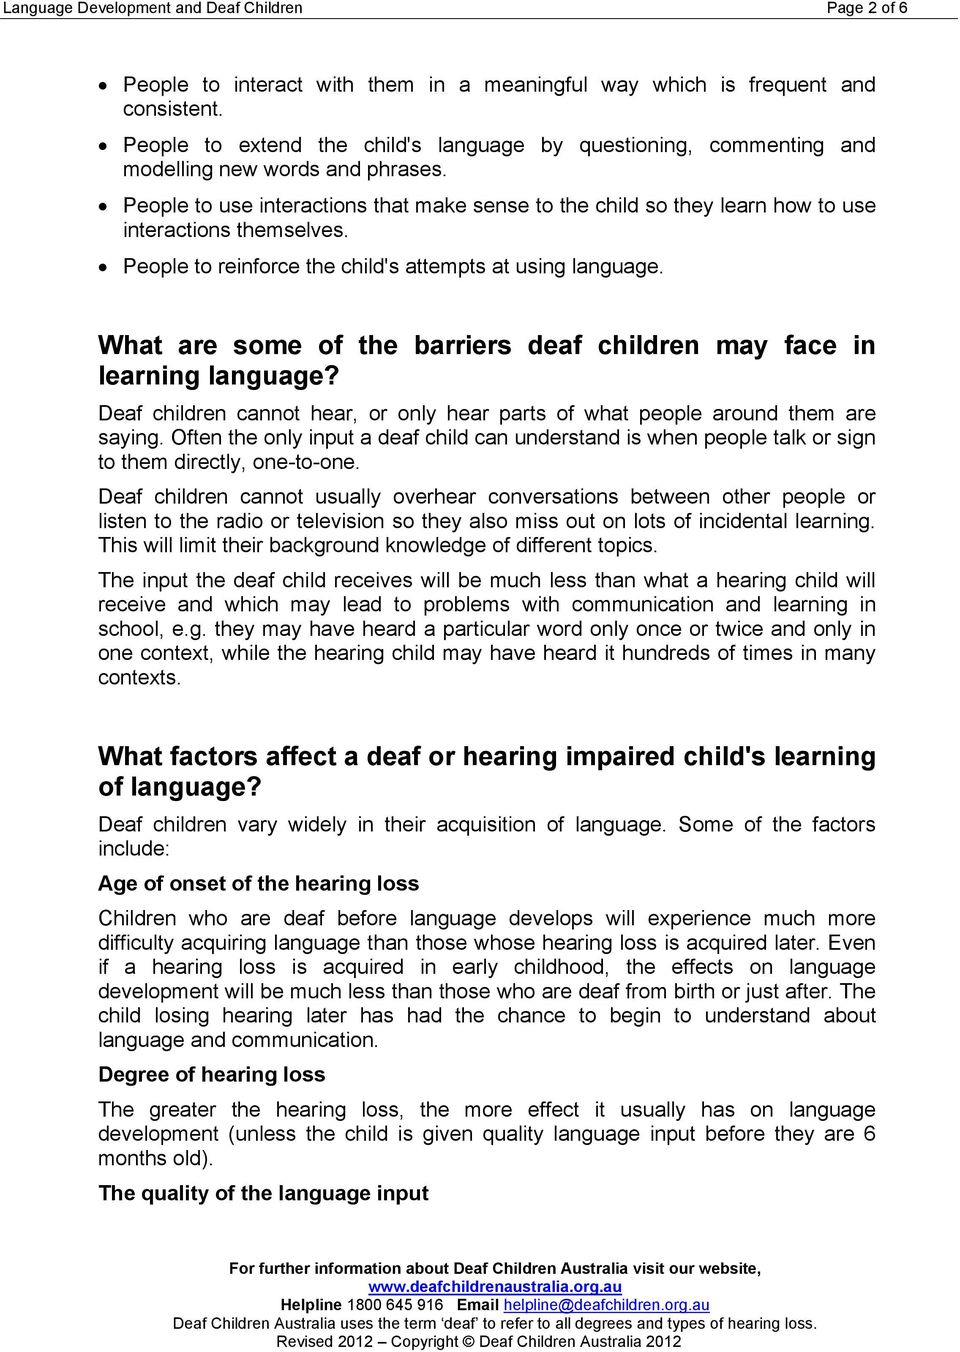 People to use interactions that make sense to the child so they learn how to use interactions themselves. People to reinforce the child's attempts at using language.